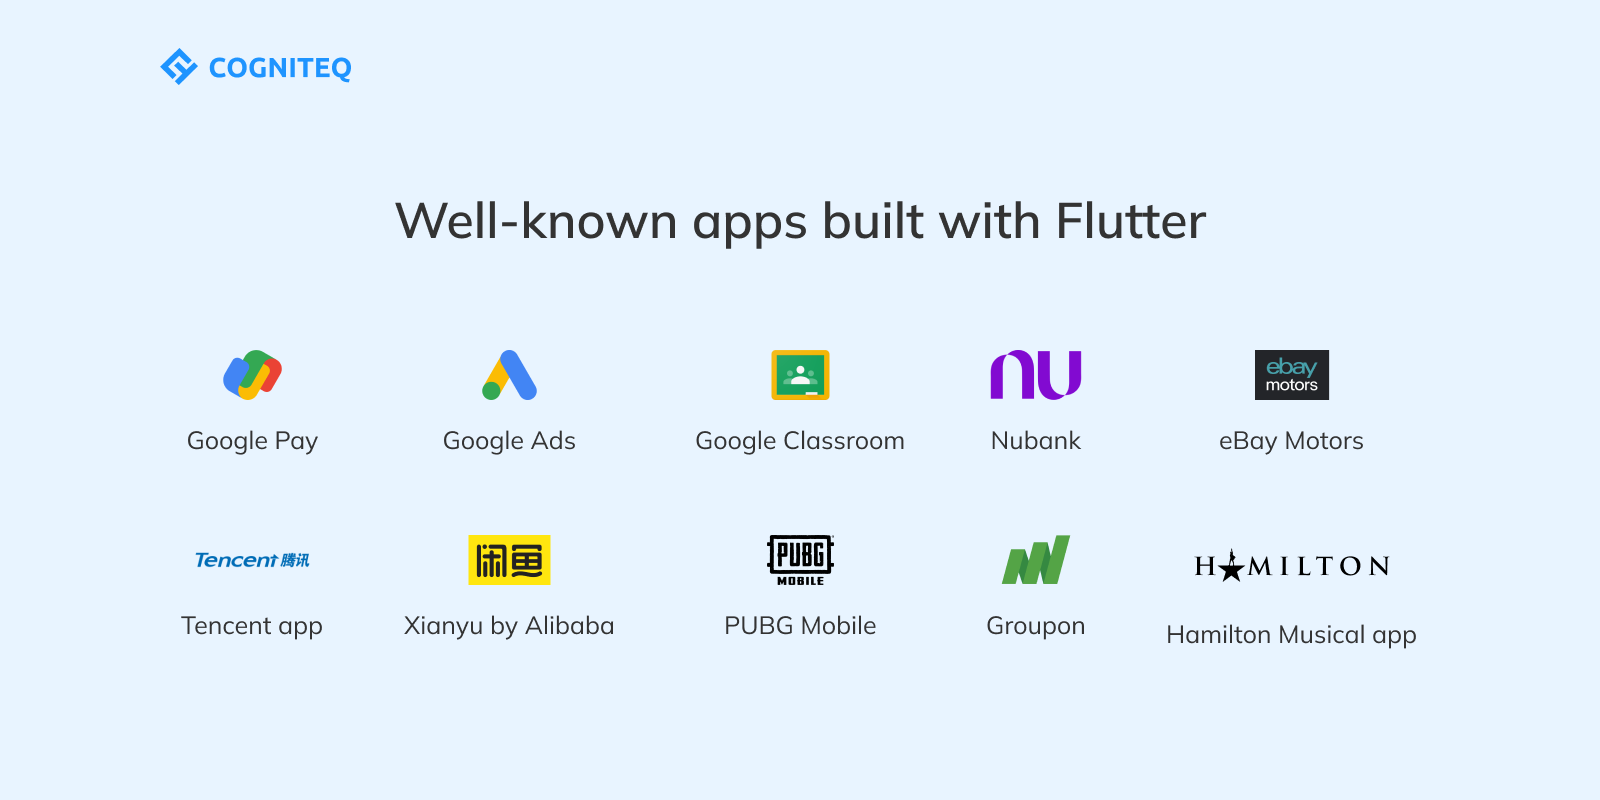 Well-known apps built with Flutter